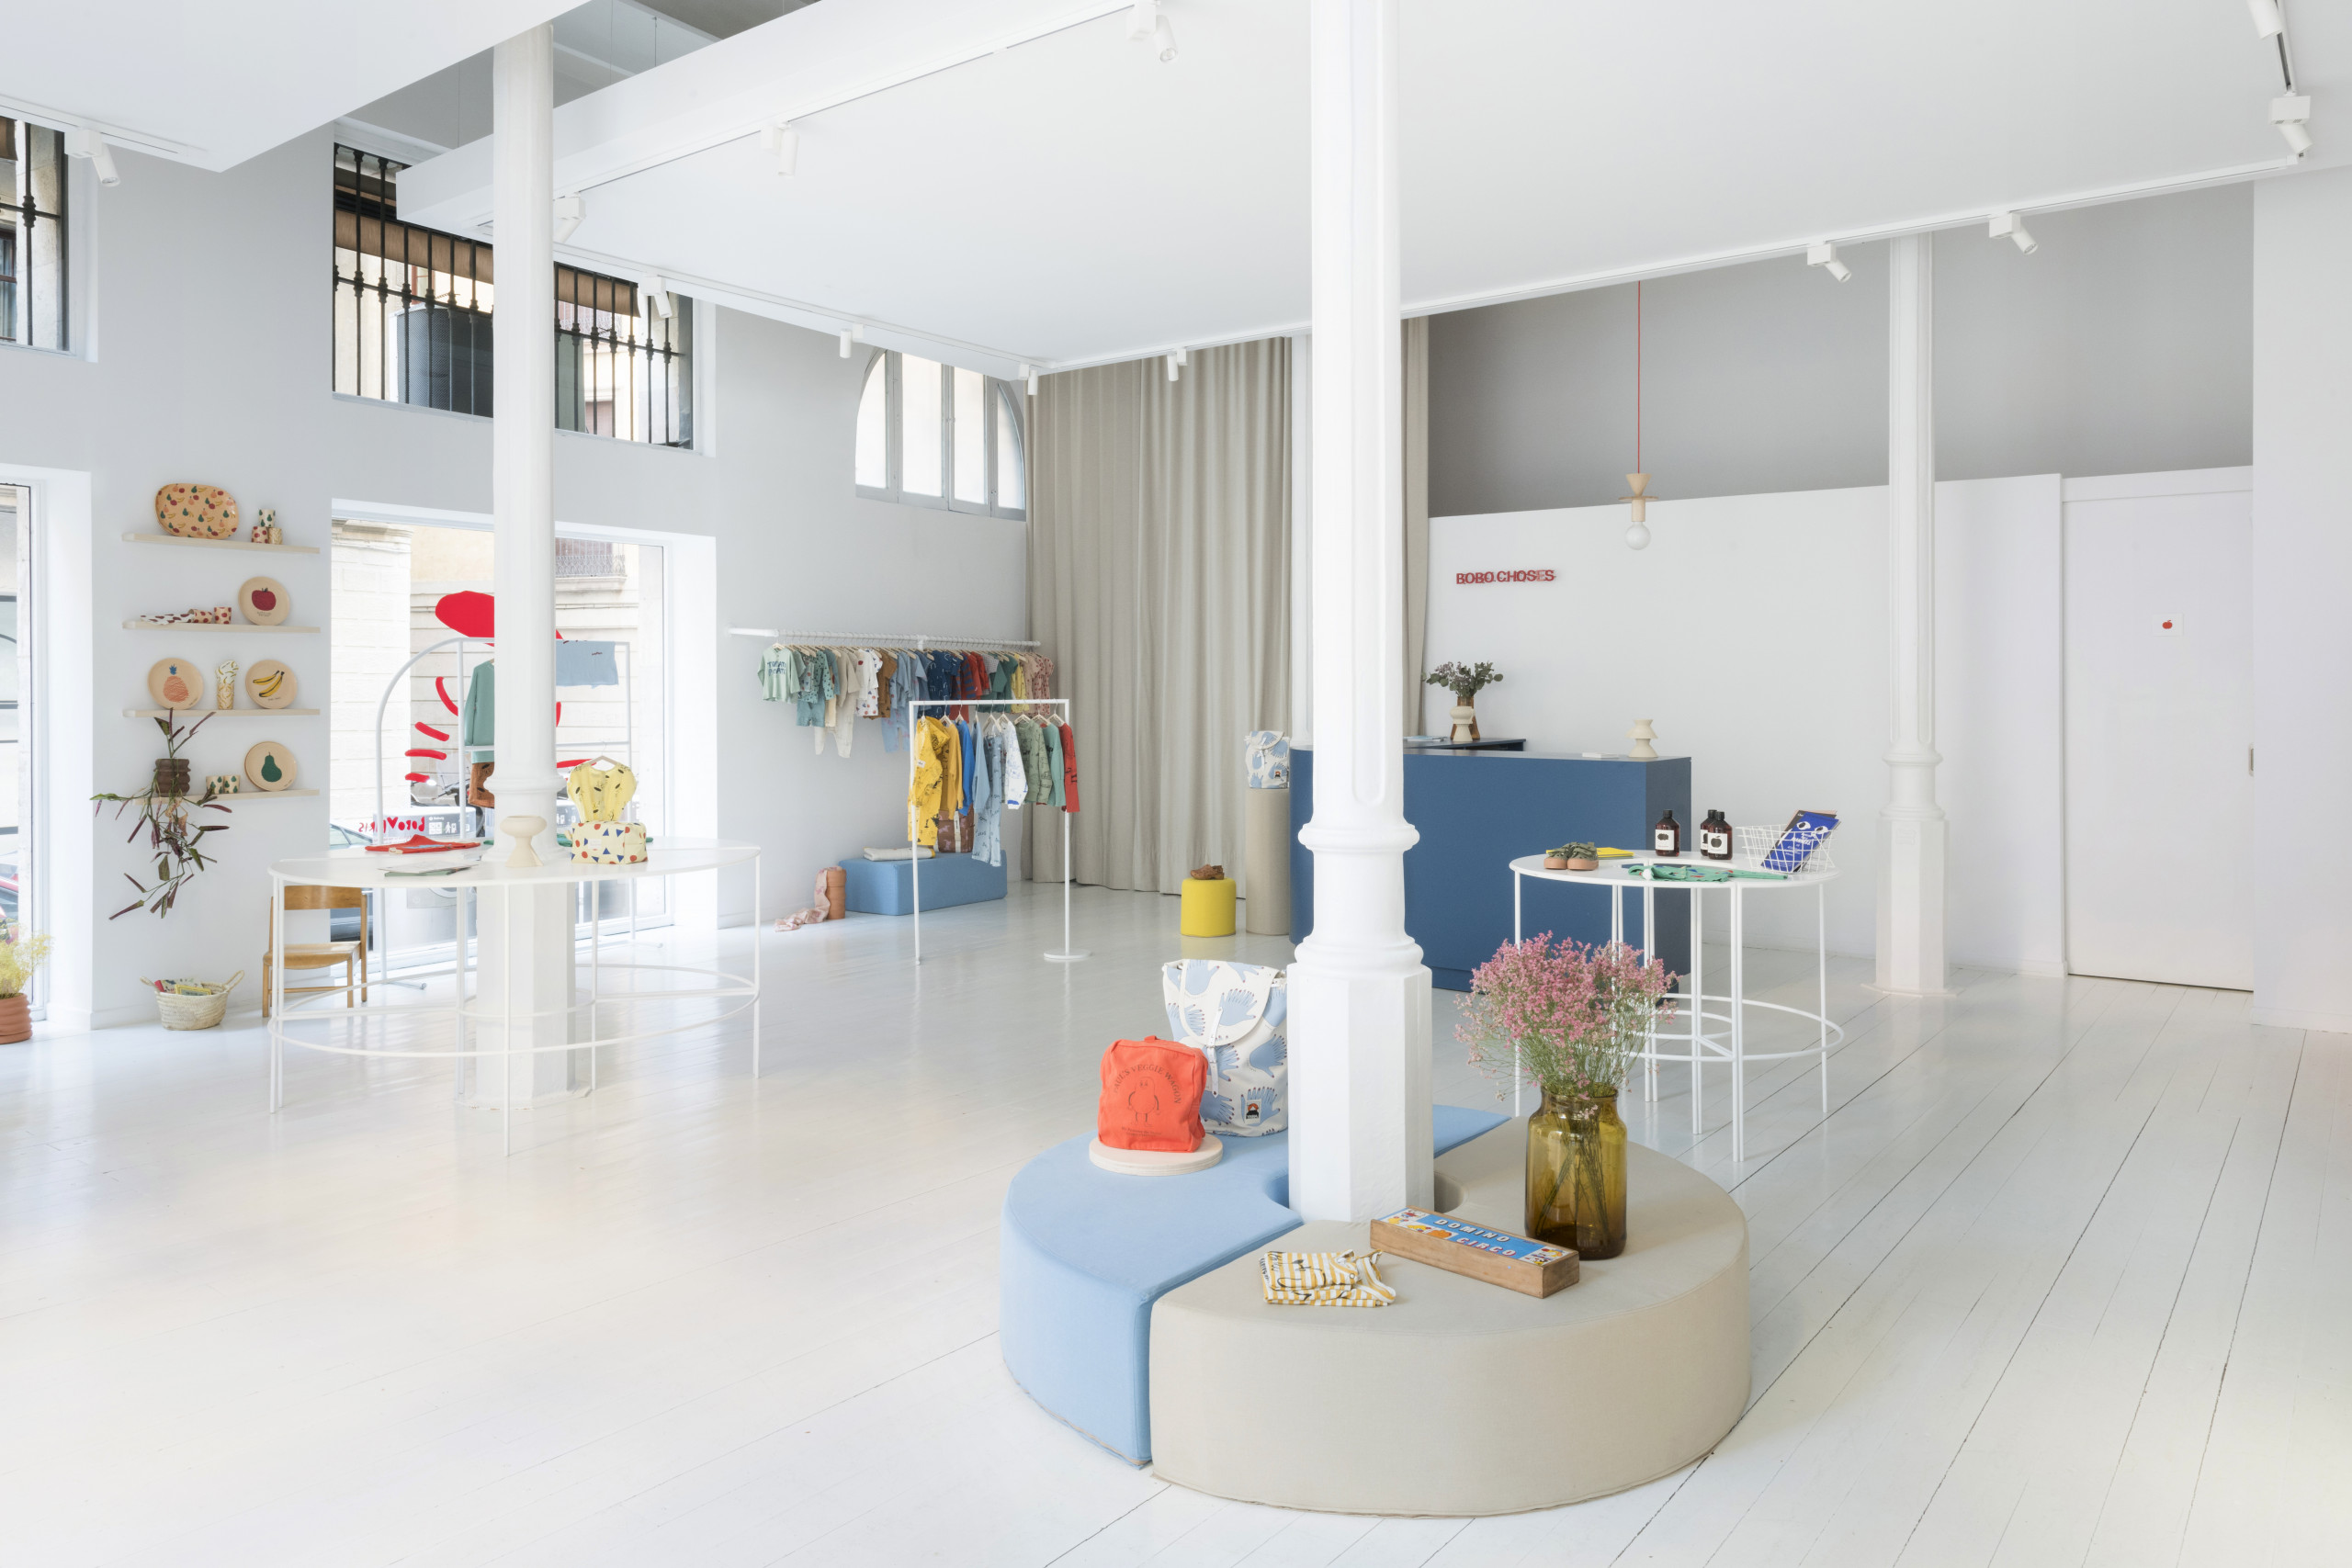 BOBO CHOSES THE HAPPYSADS RETAIL SPACE